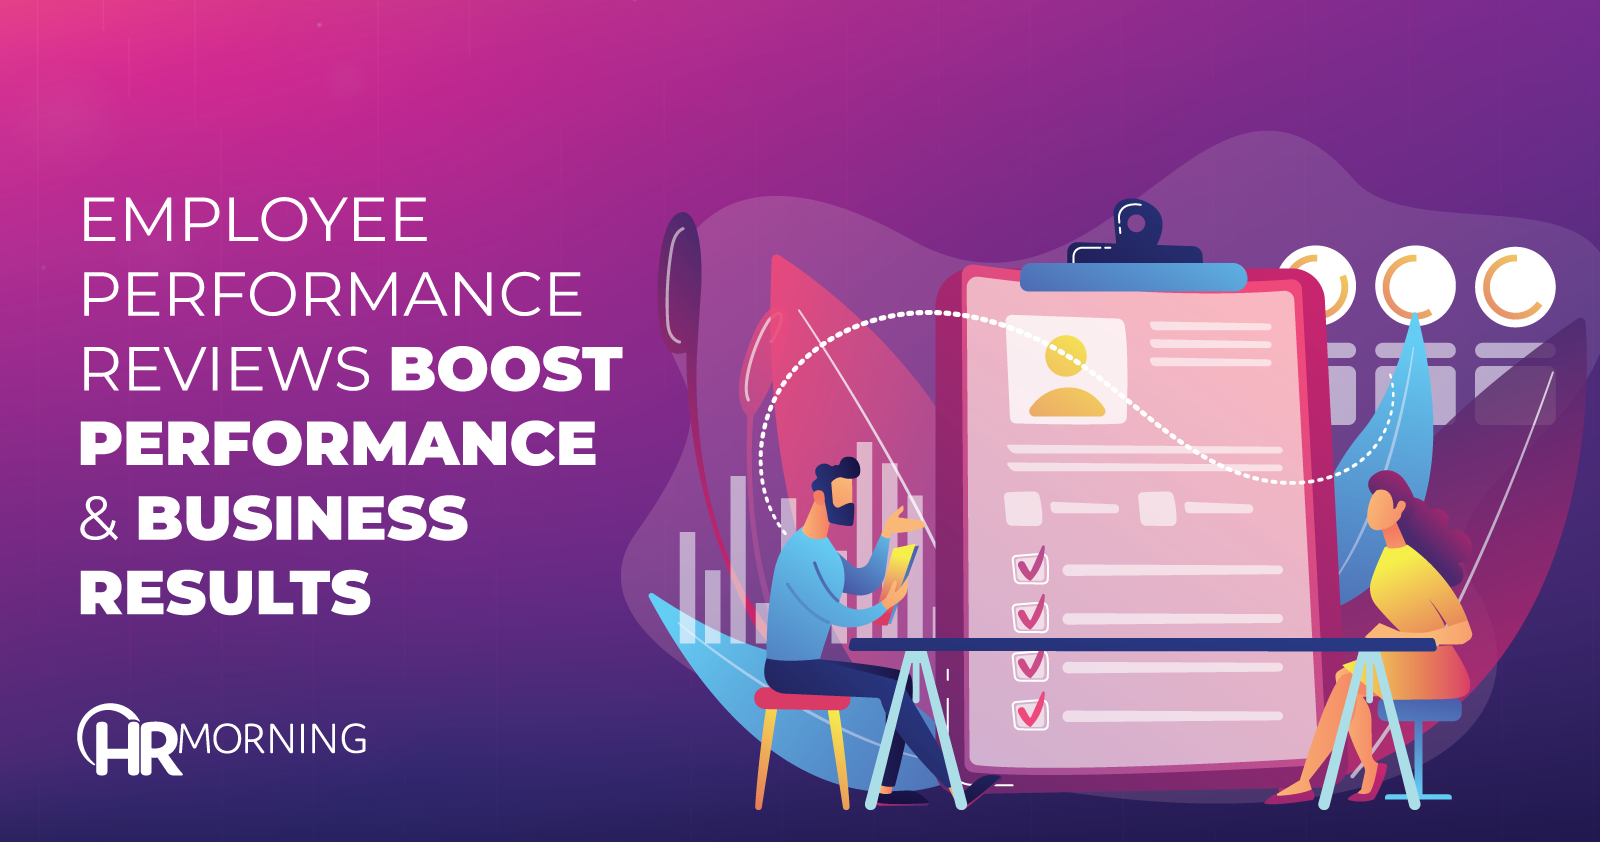 Employee performance reviews boost performance & business results